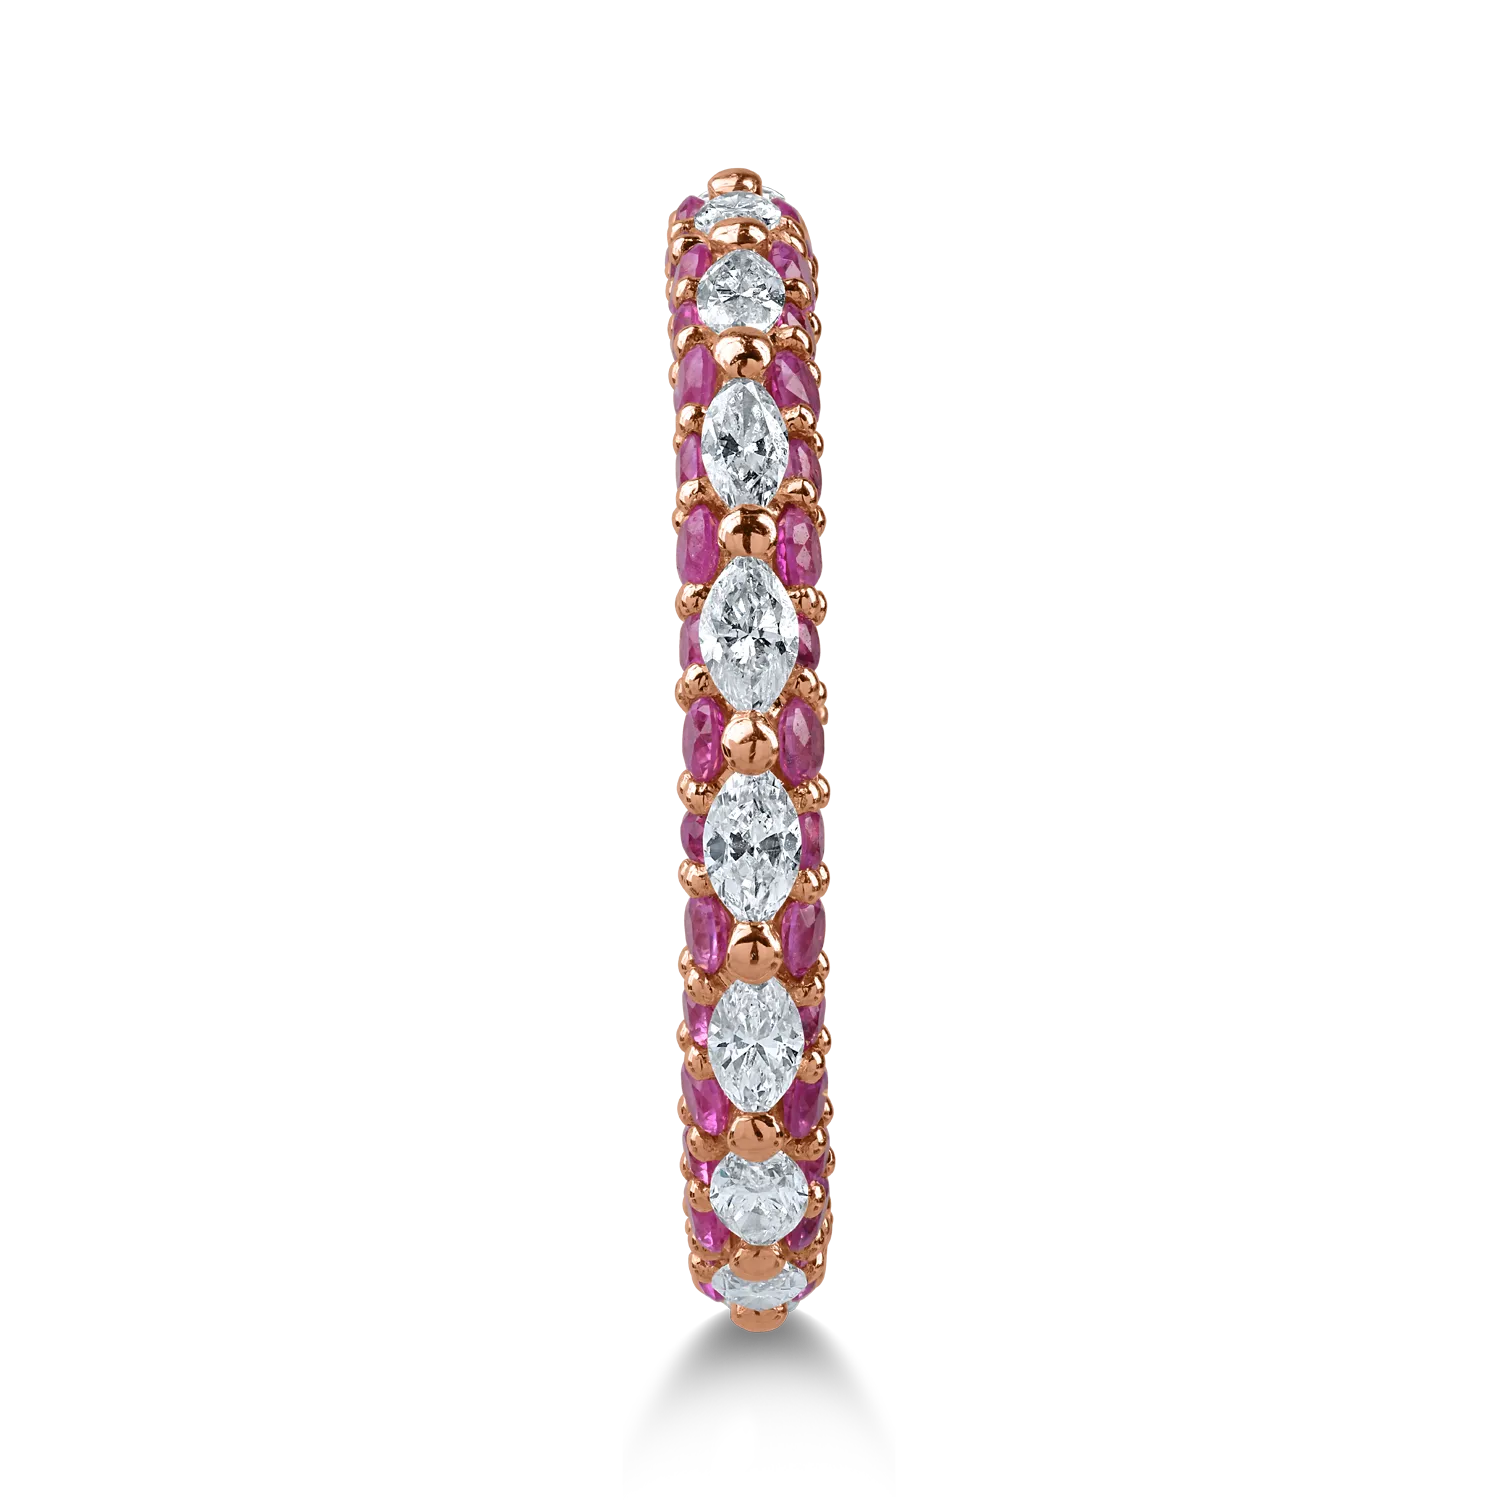 Eternity ring in rose gold with 0.6ct diamonds and 1.3ct pink sapphires